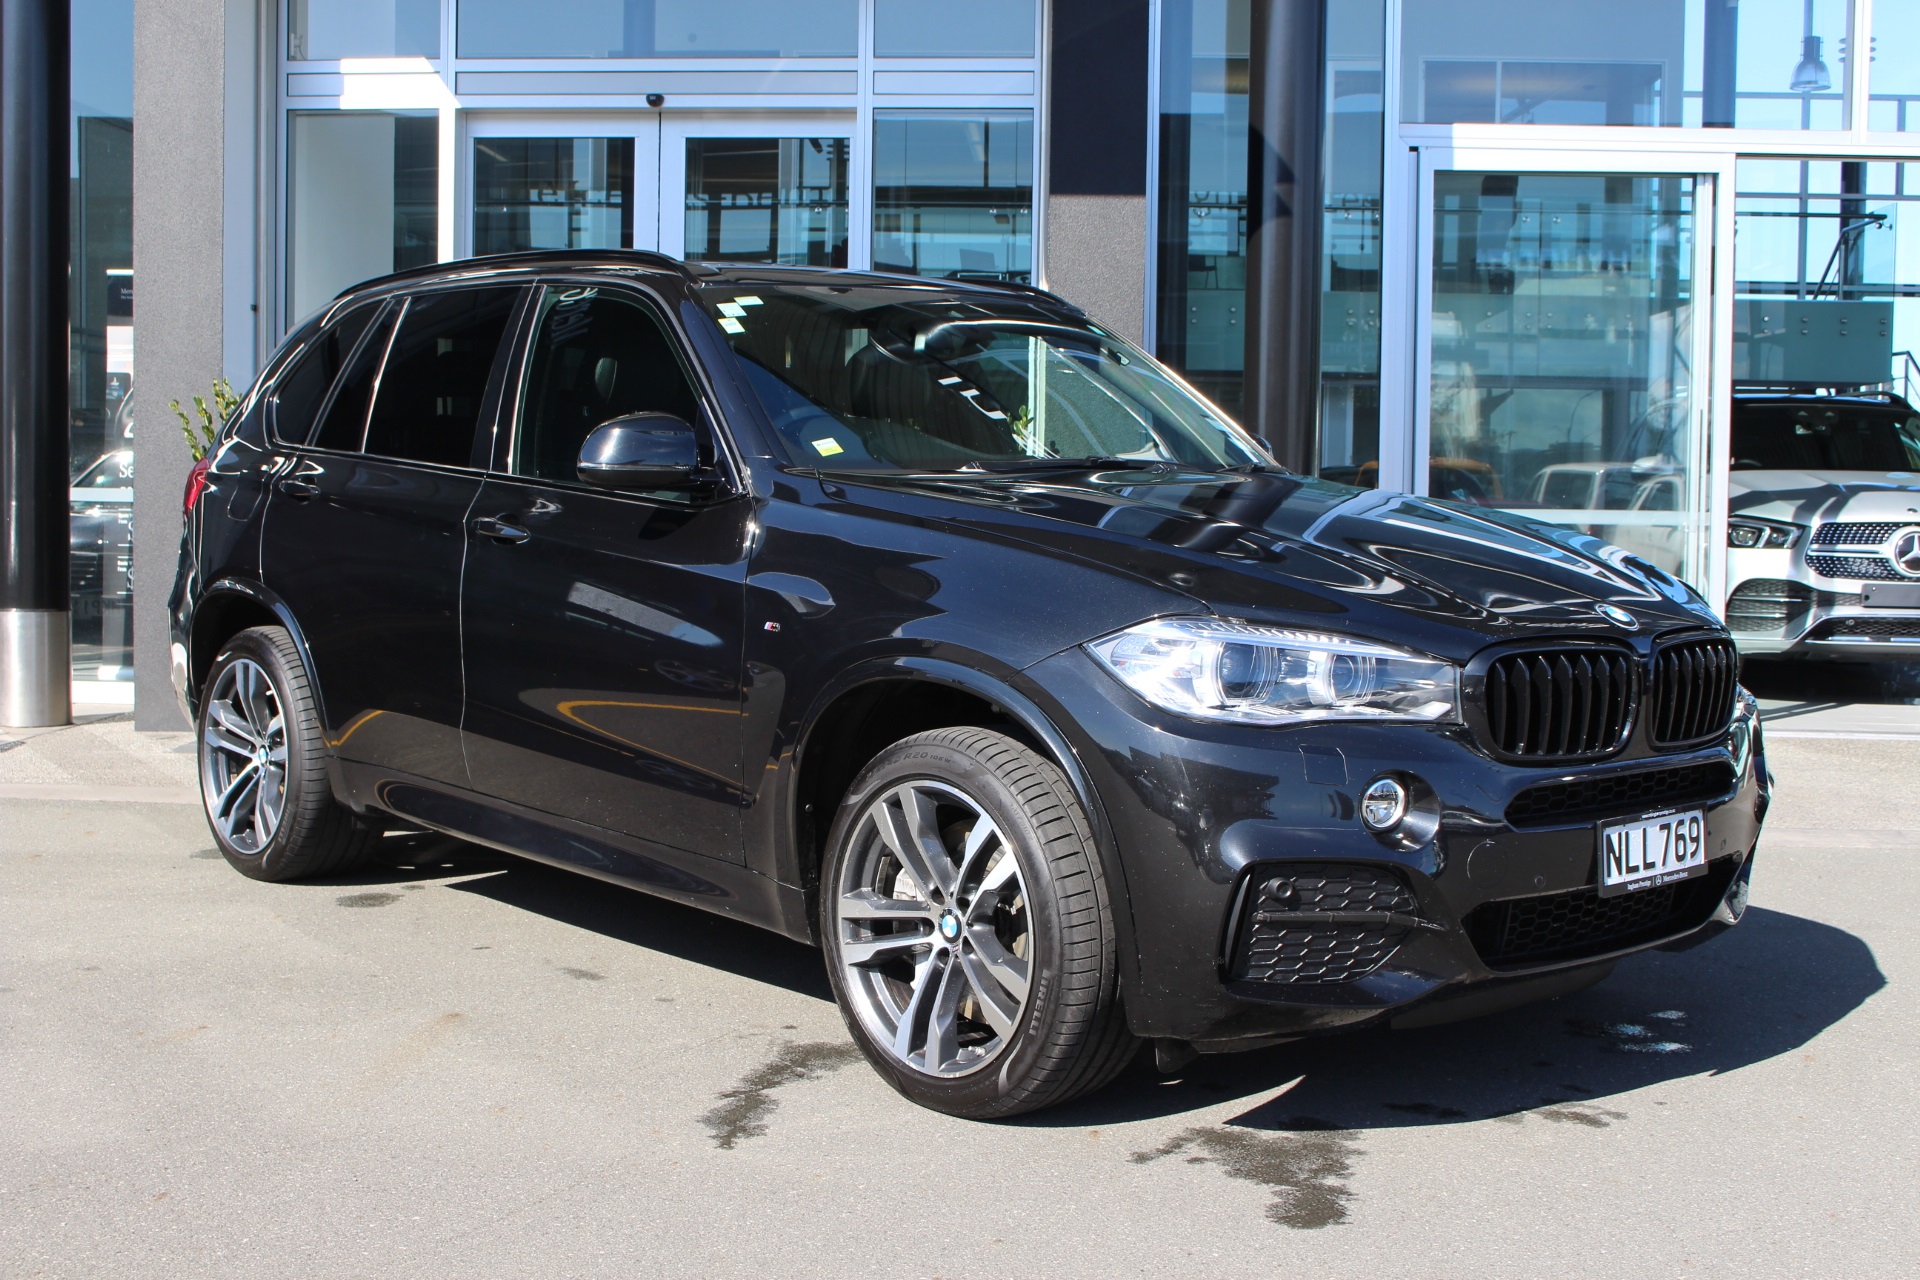 bmw-x5-2016-m50d-7-seater-8-speed-automatic